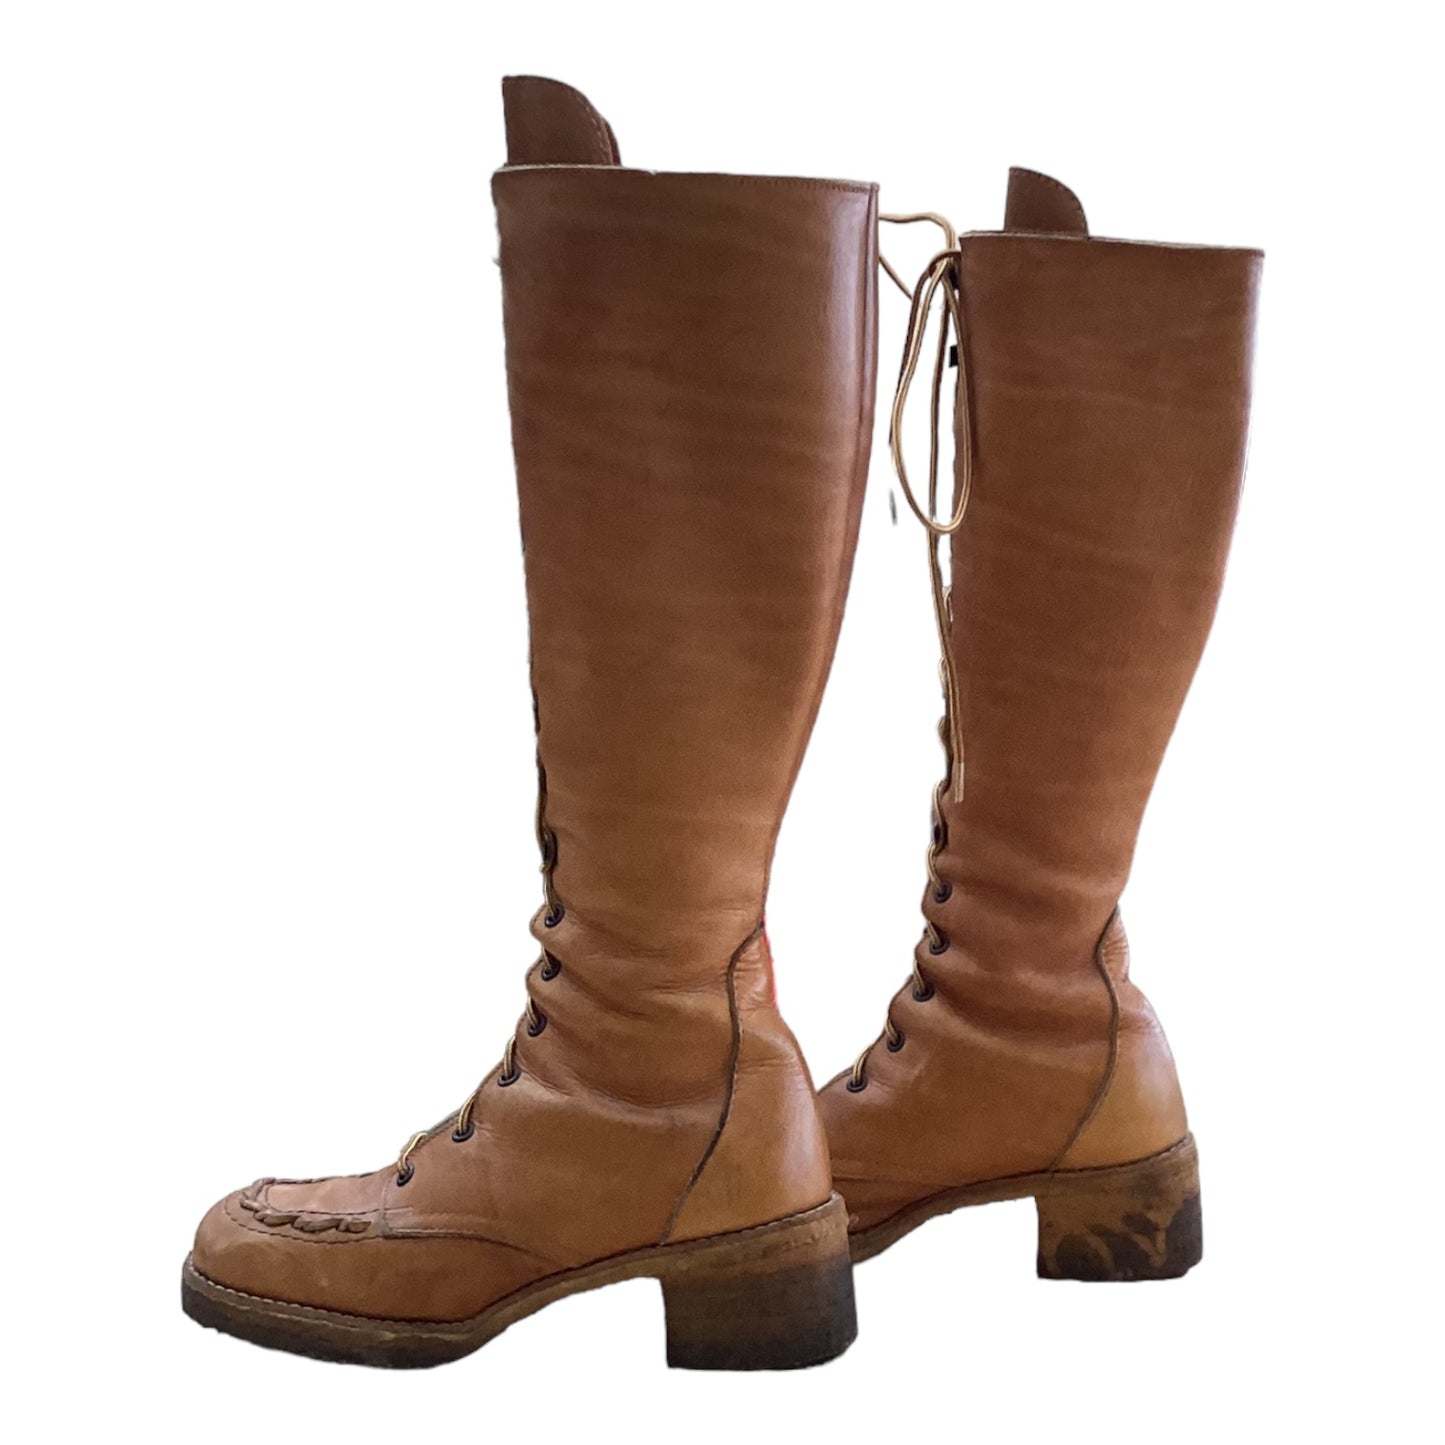 Boots Designer By Clothes Mentor  Size: 5.5